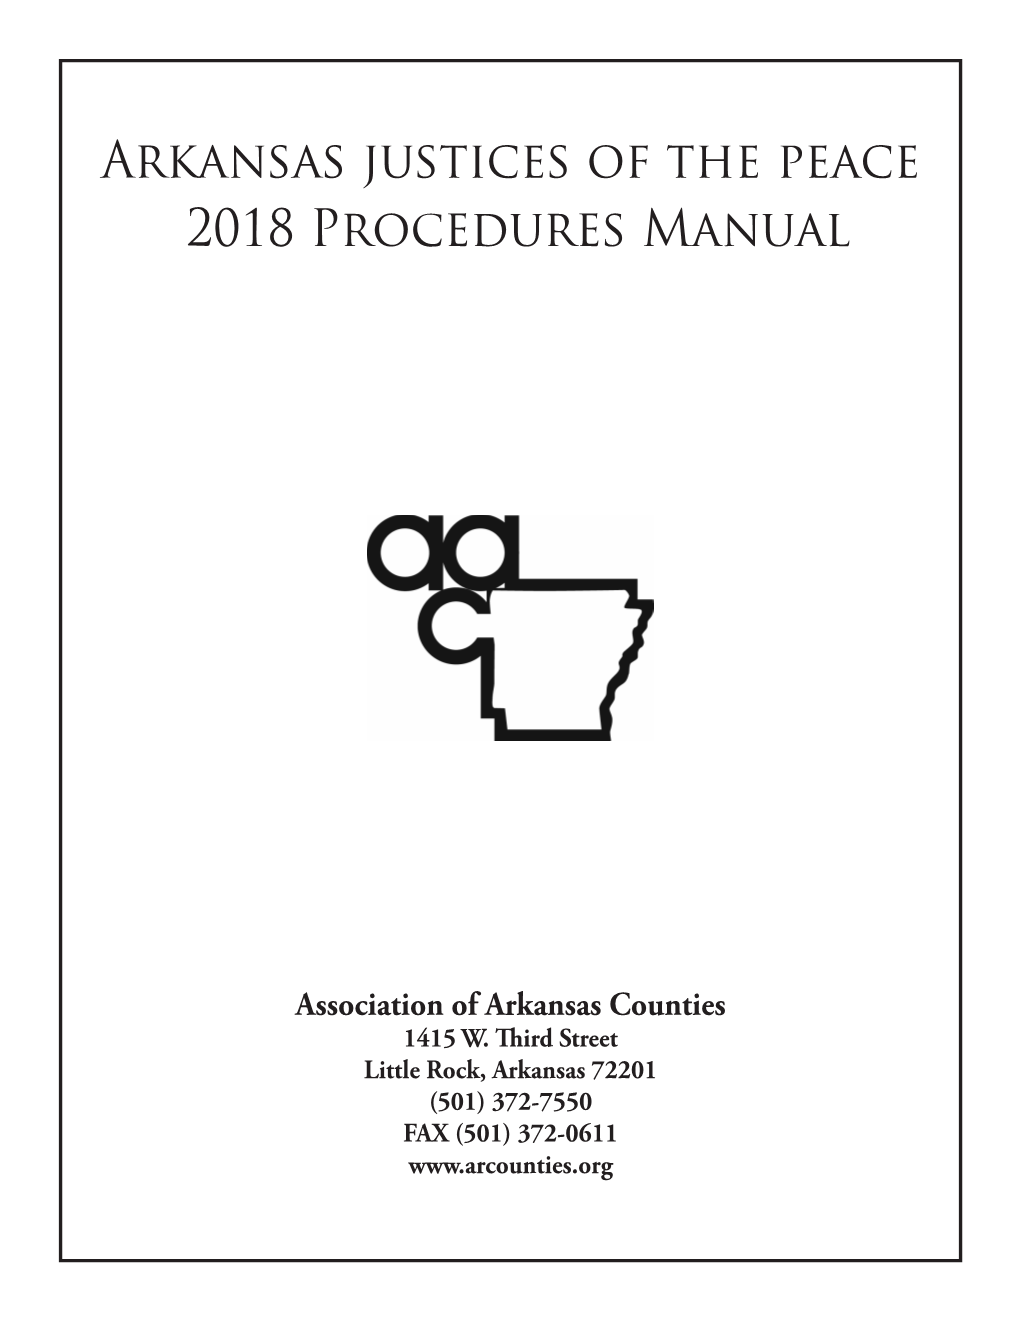 Arkansas Justices of the Peace 2018 Procedures Manual